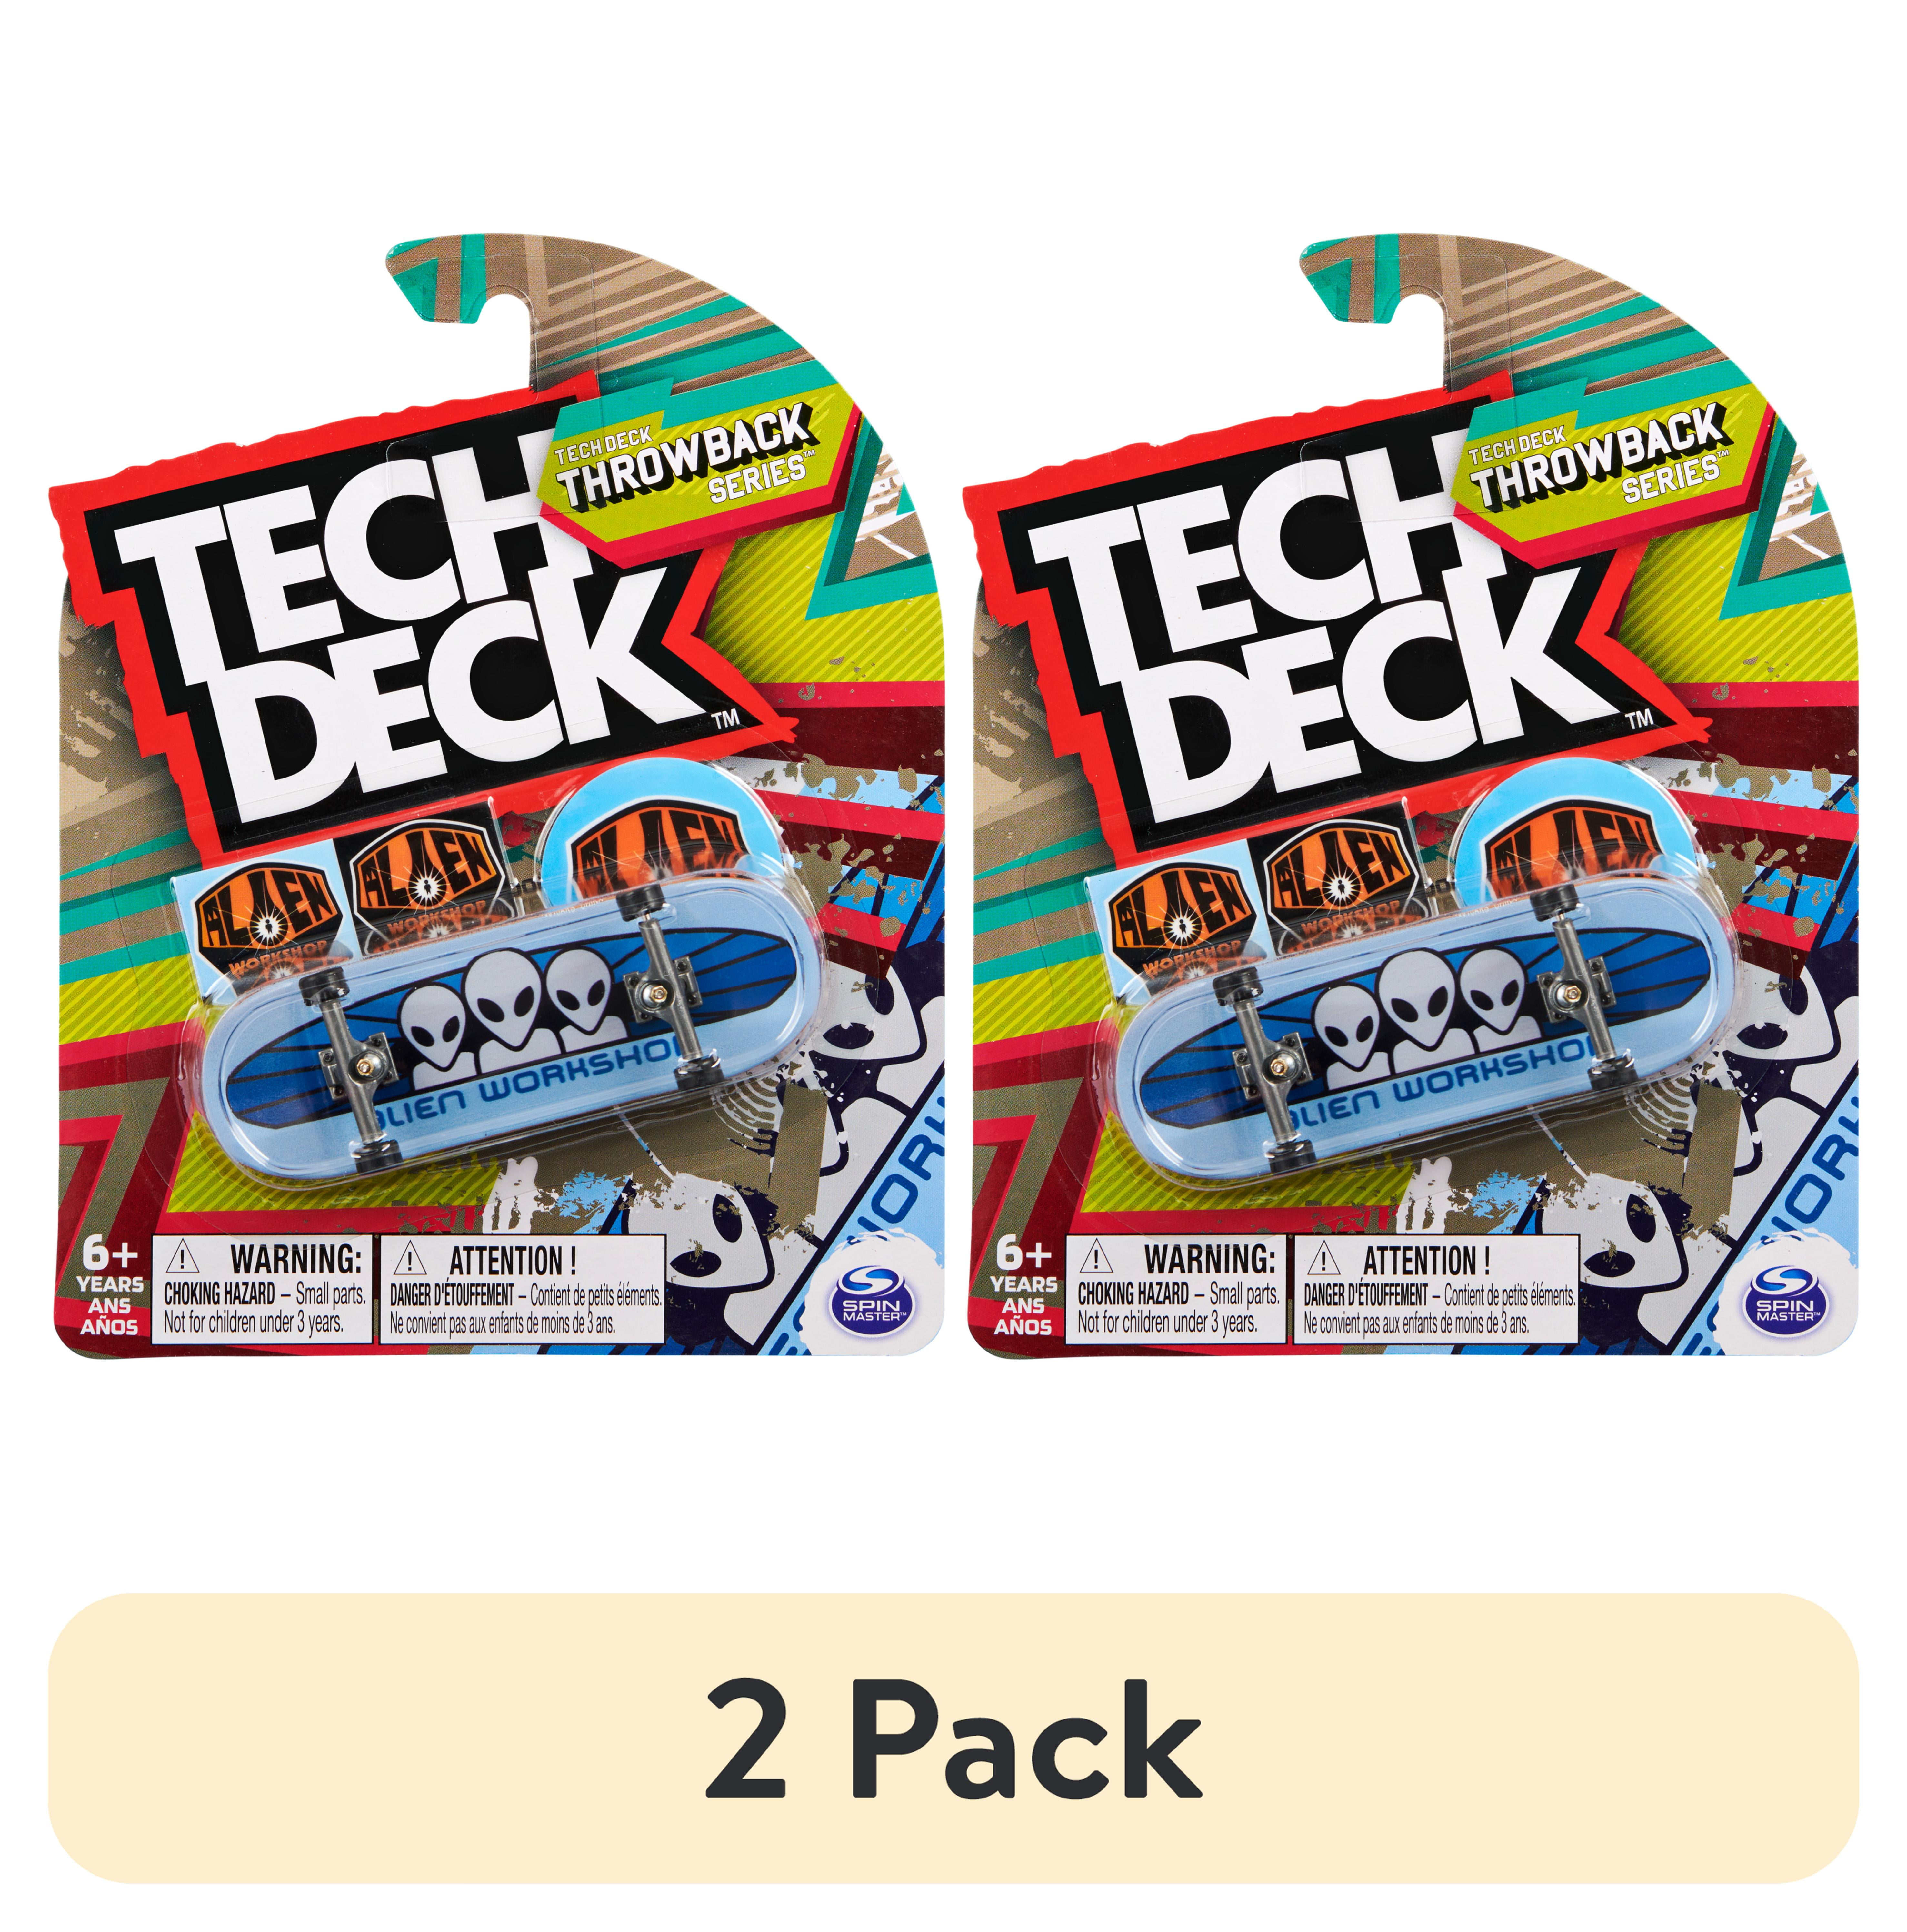 (2 pack) Tech Deck, 96mm Throwback Series Finger Skateboard (Styles May  Vary) 